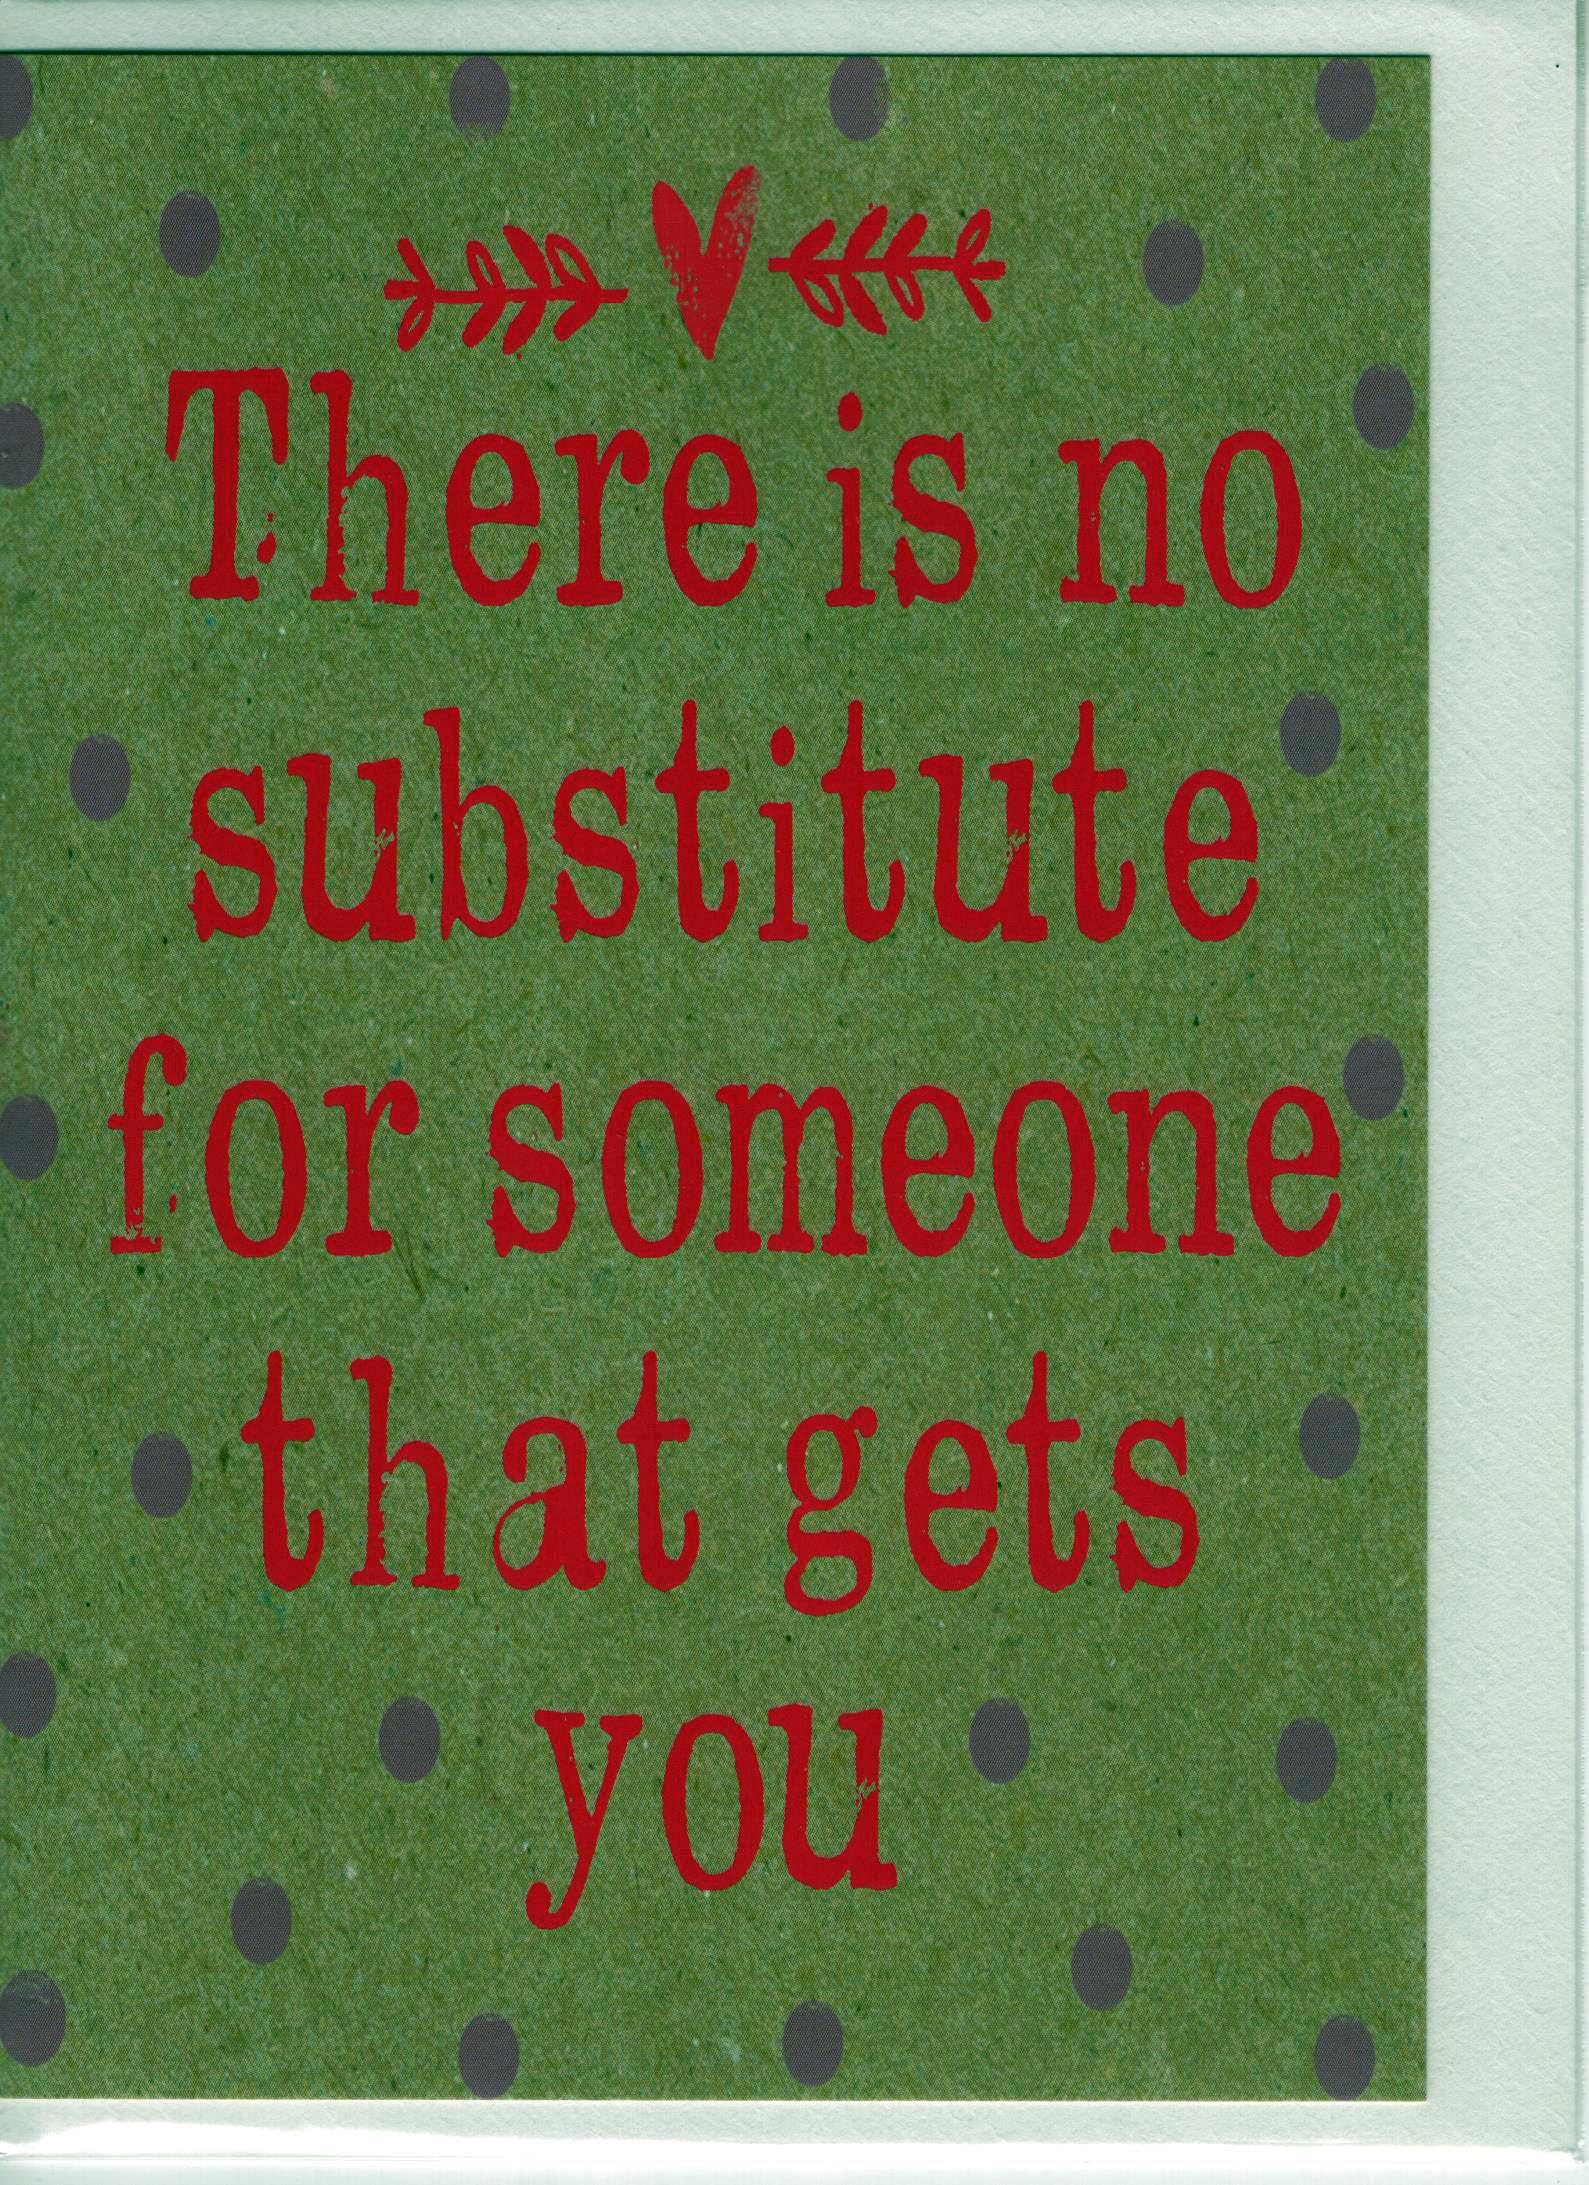 There is no Substitute for Someone that gets you